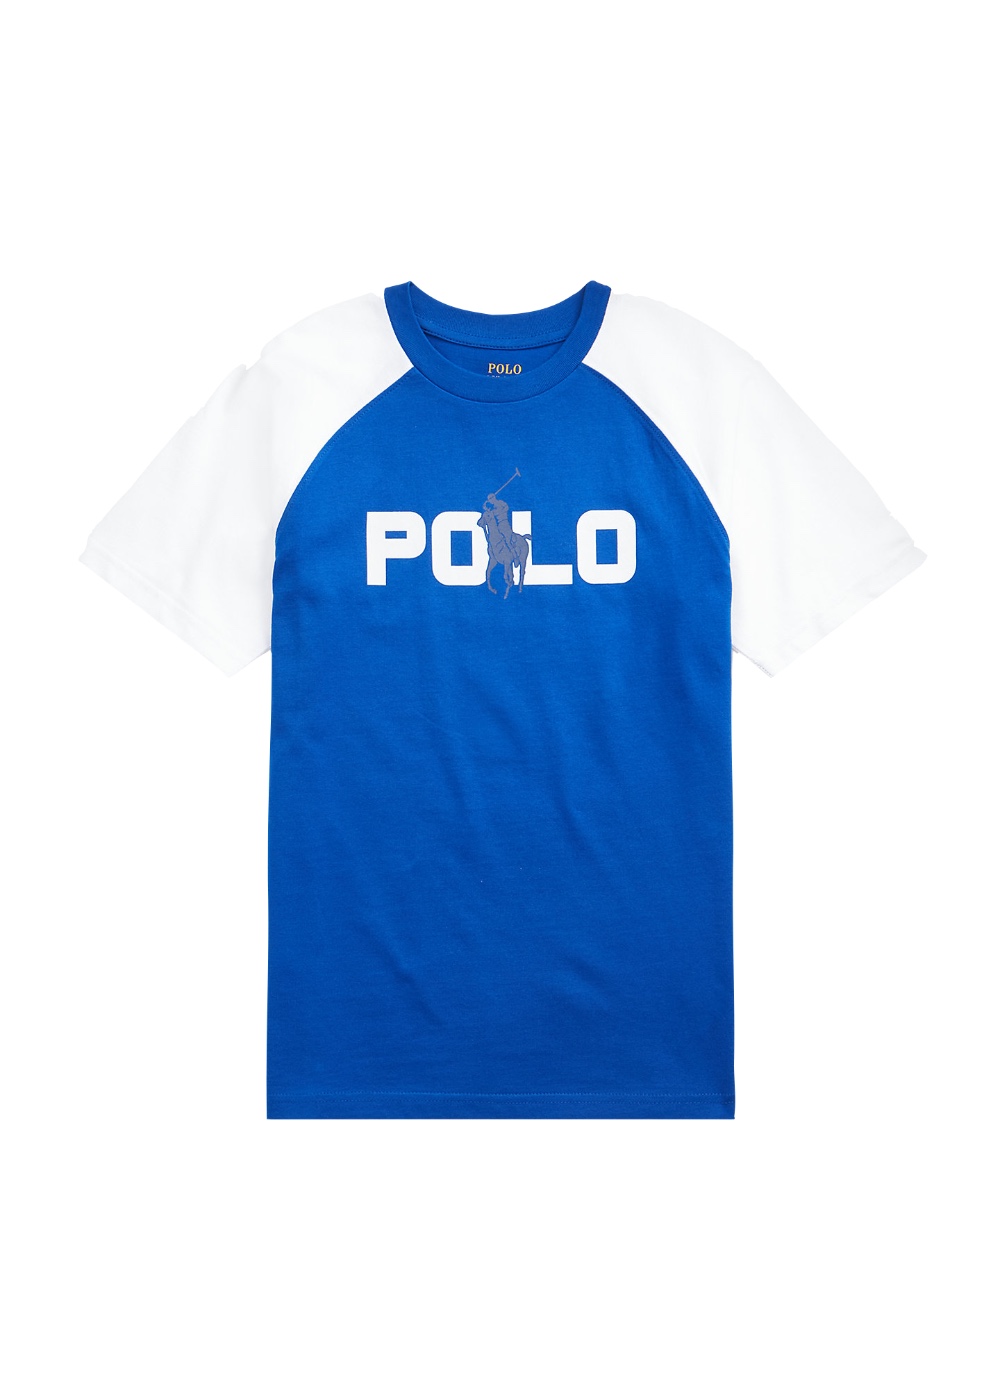 Featured image for “Polo Ralph Lauren T-shirt stampa”